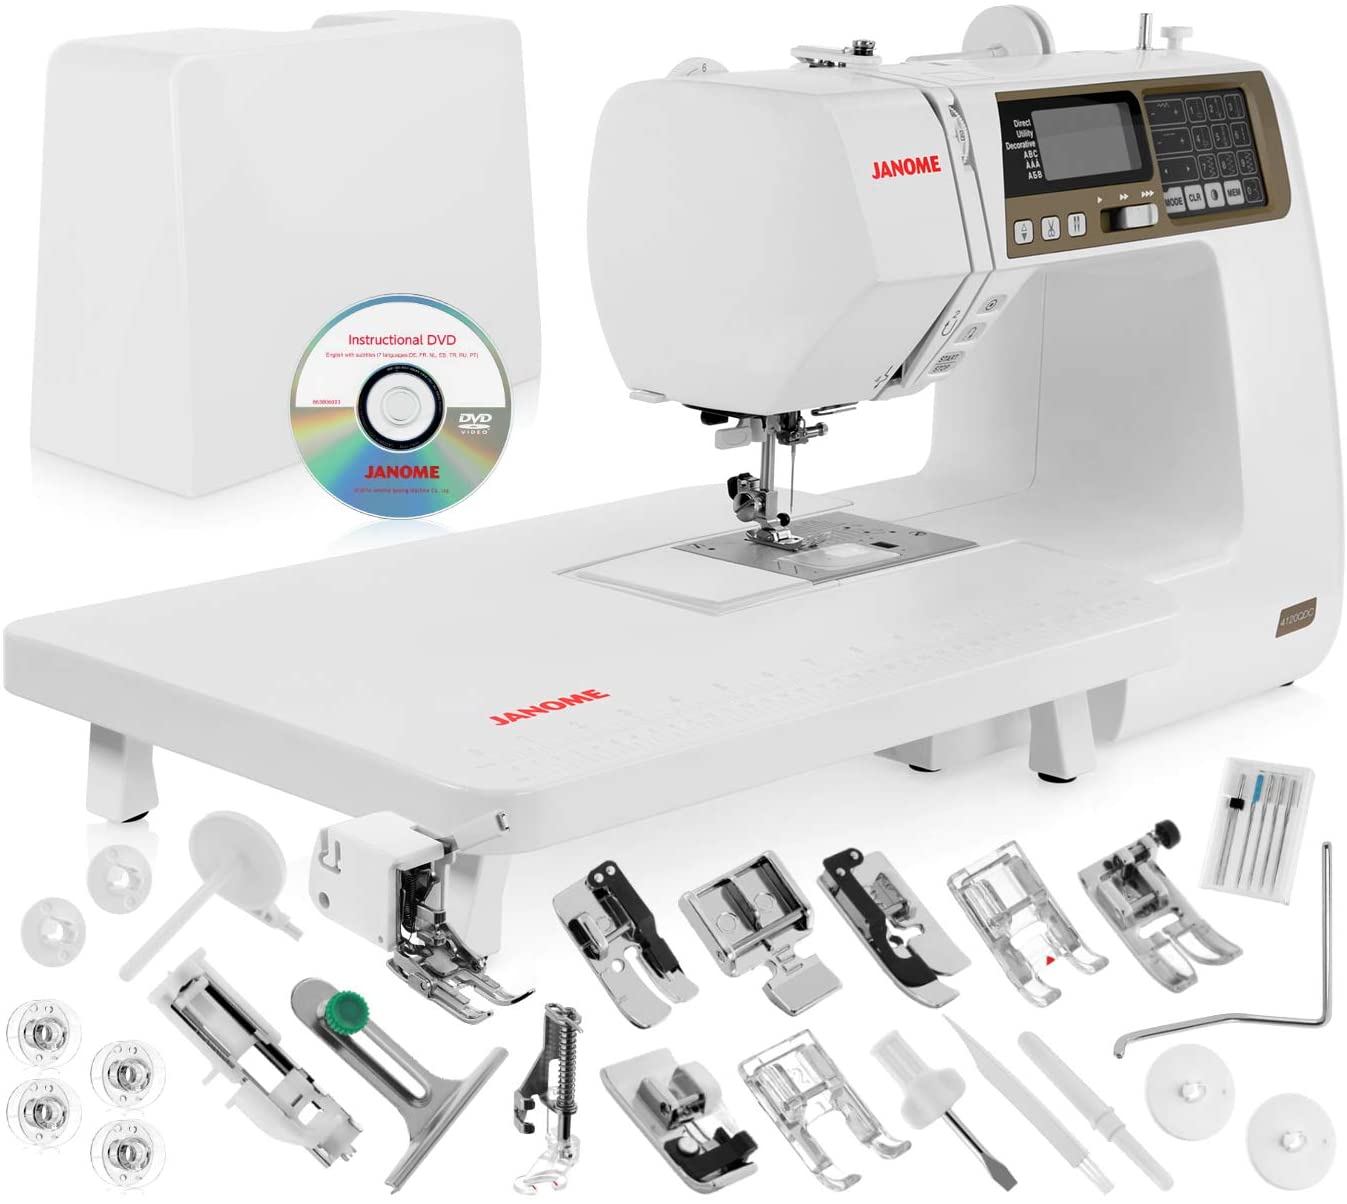 Janome 4120QDC Computerized Sewing Machine - Best Janome Sewing Machine for Quilting